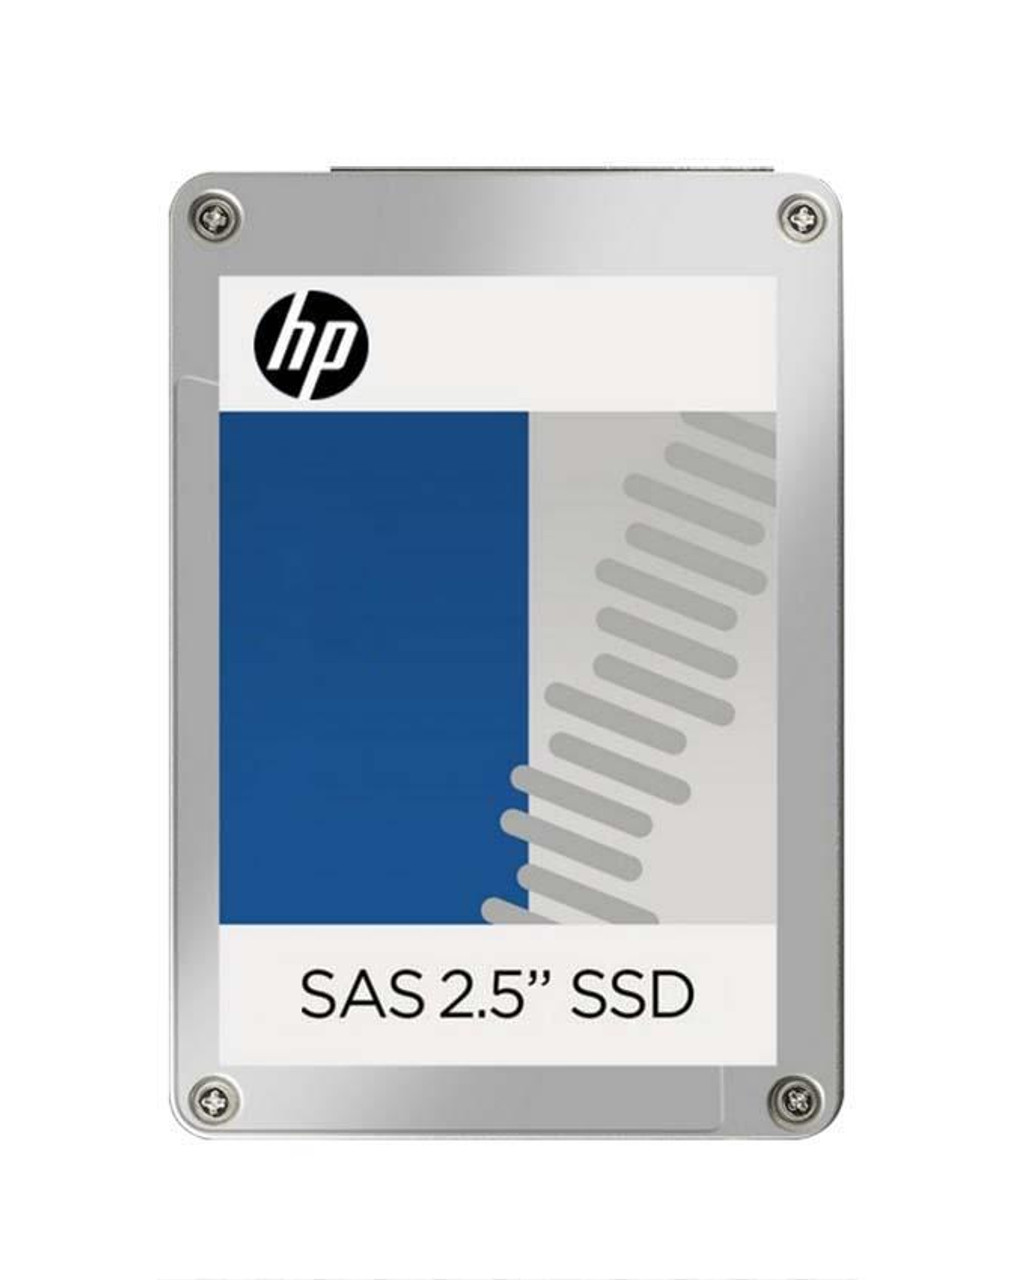 H6G63AUR HPE 960GB SAS 6Gbps 2.5-inch Internal Solid State Drive (SSD) for XP7 Storage